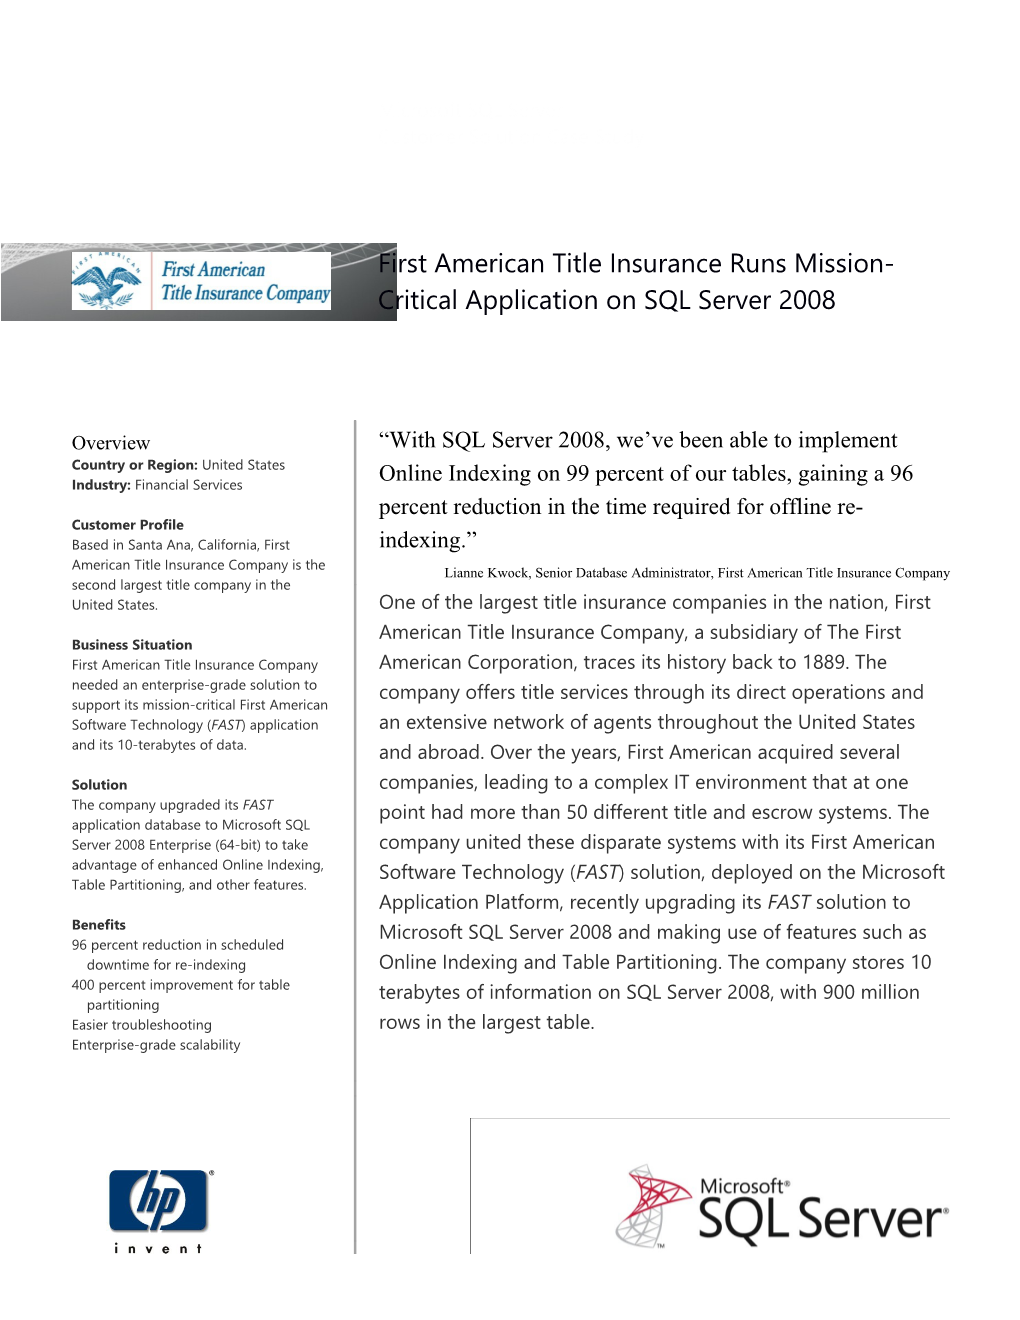 First American Title Insurance Runs Mission Critical Application on SQL Server 2008